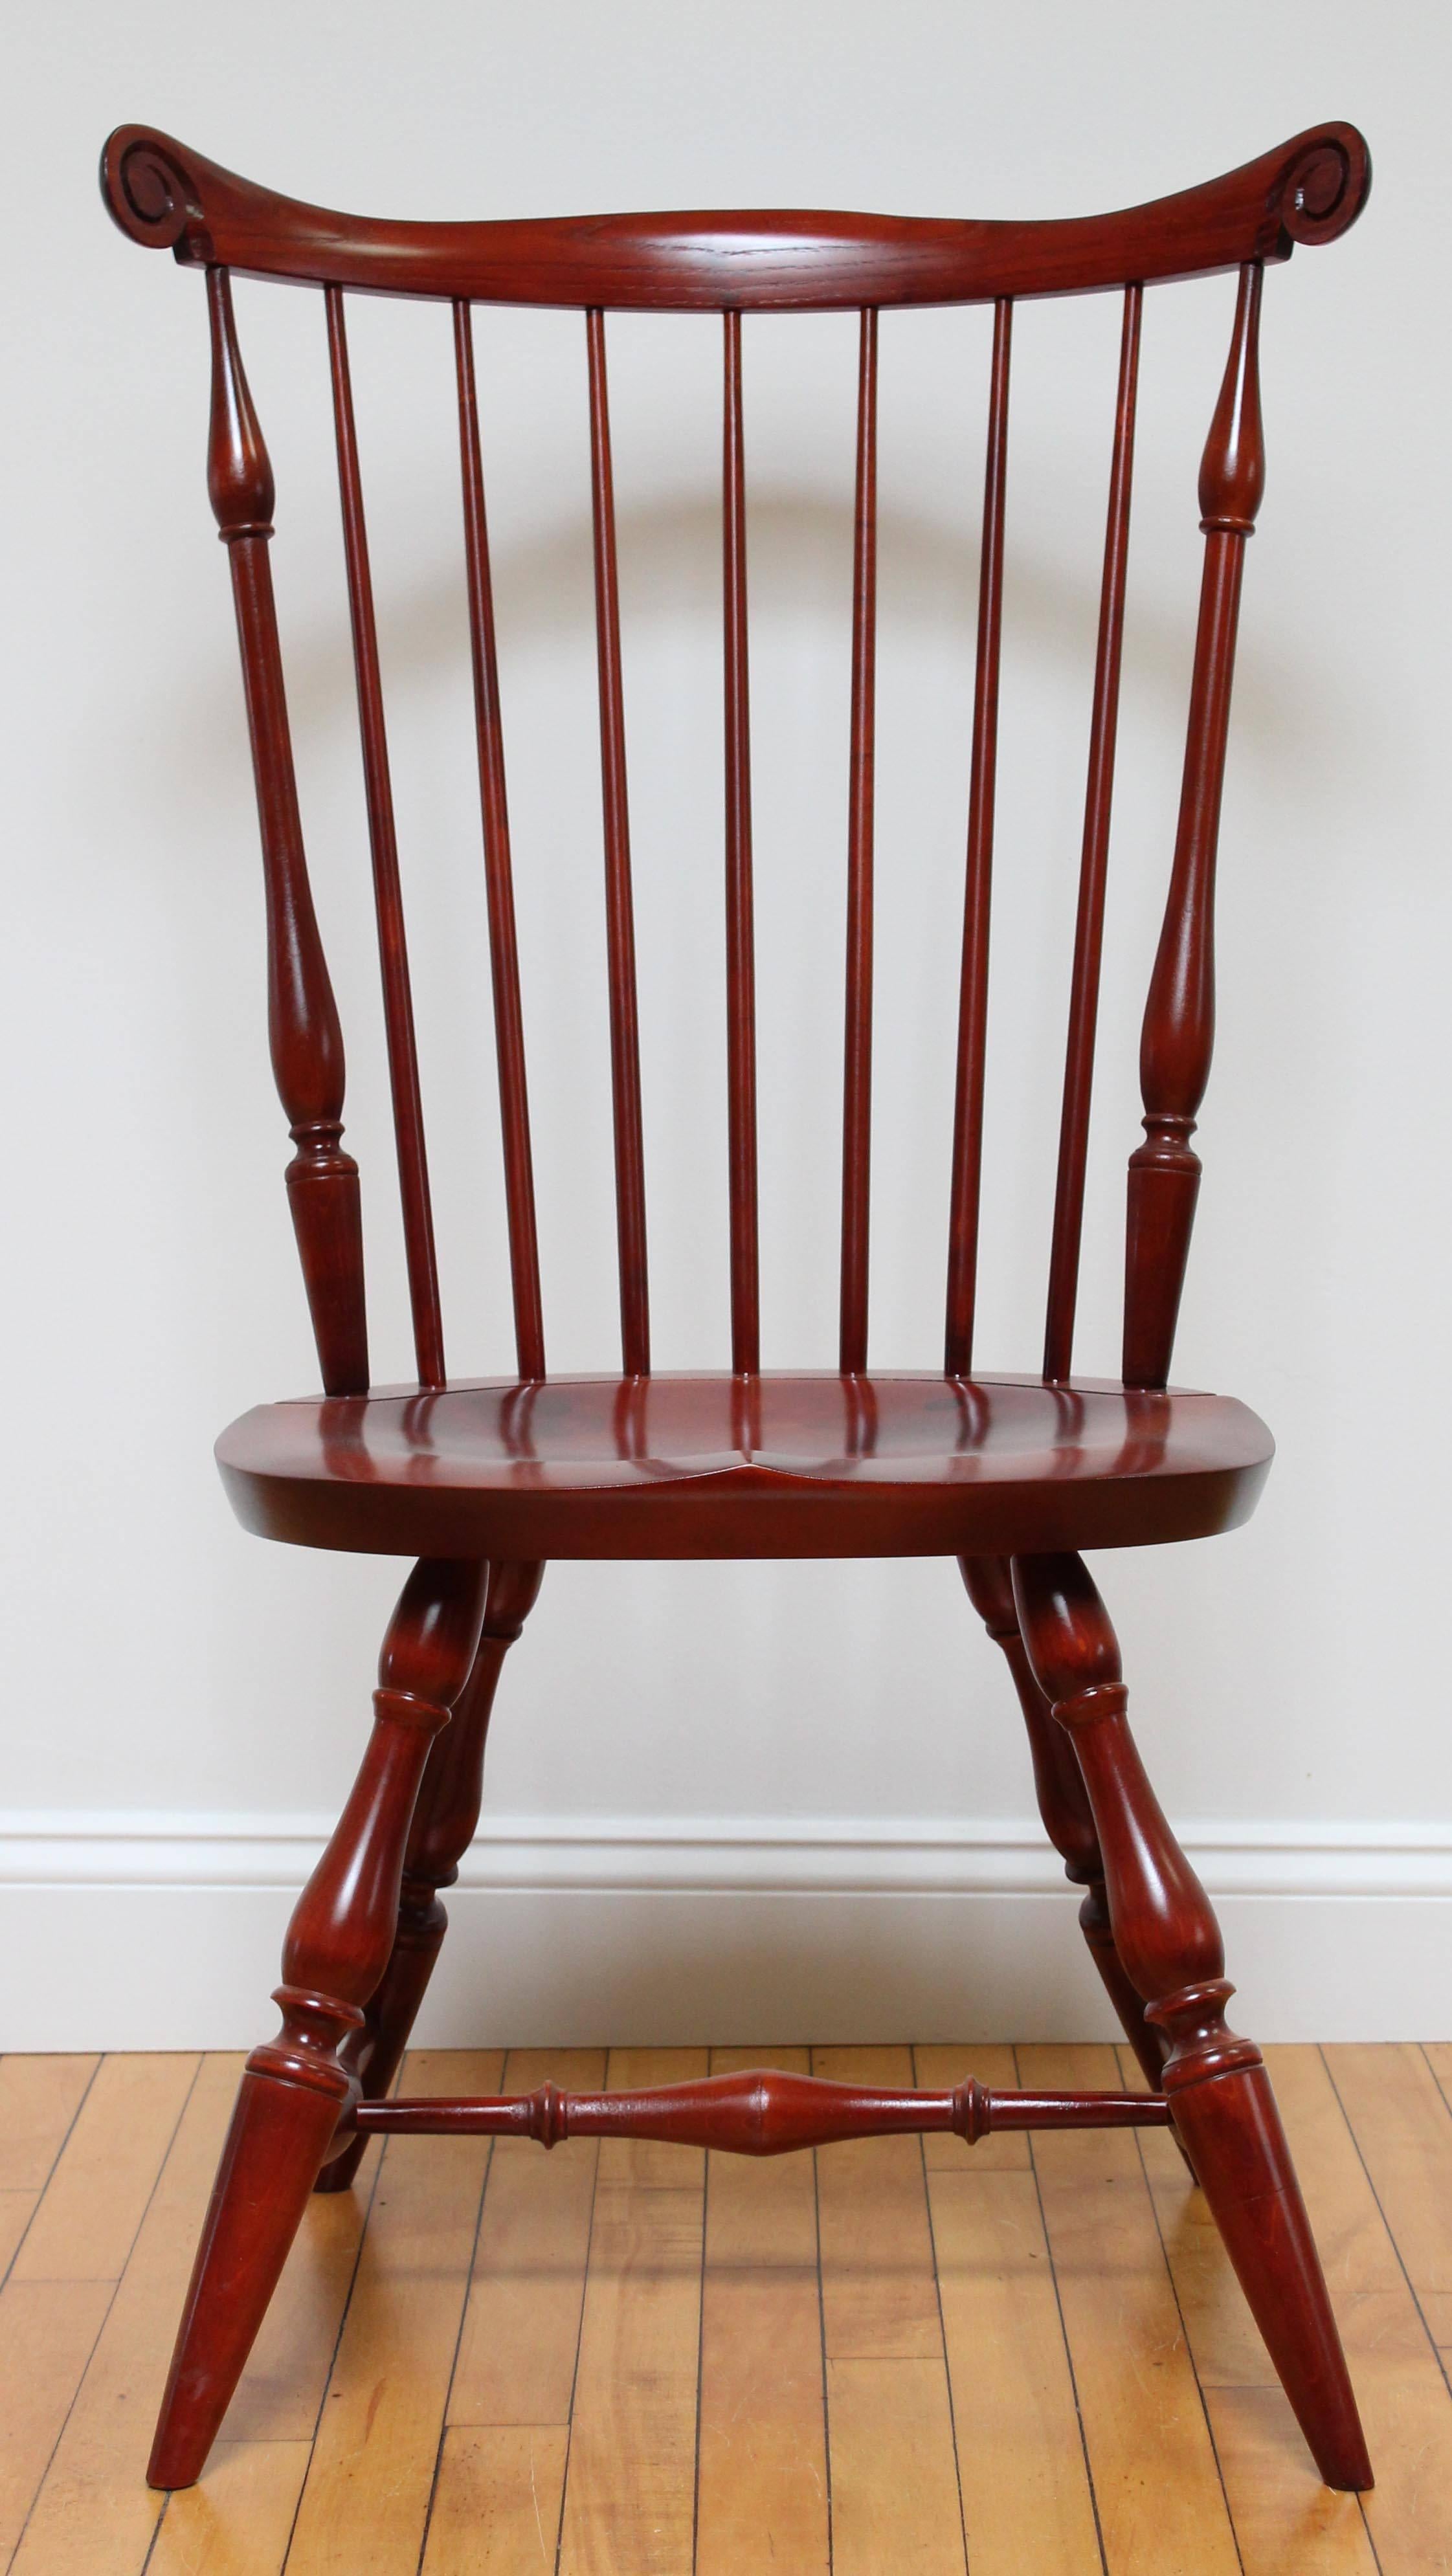 Largest fan back dining chair style
Proportions taken from chairs originating on Nantucket island
Regional adaptations showcase wide leg splay
Oval seat with feature-line
Tapered spindles
Shown: Maple seat / walnut stain

Overall: 25